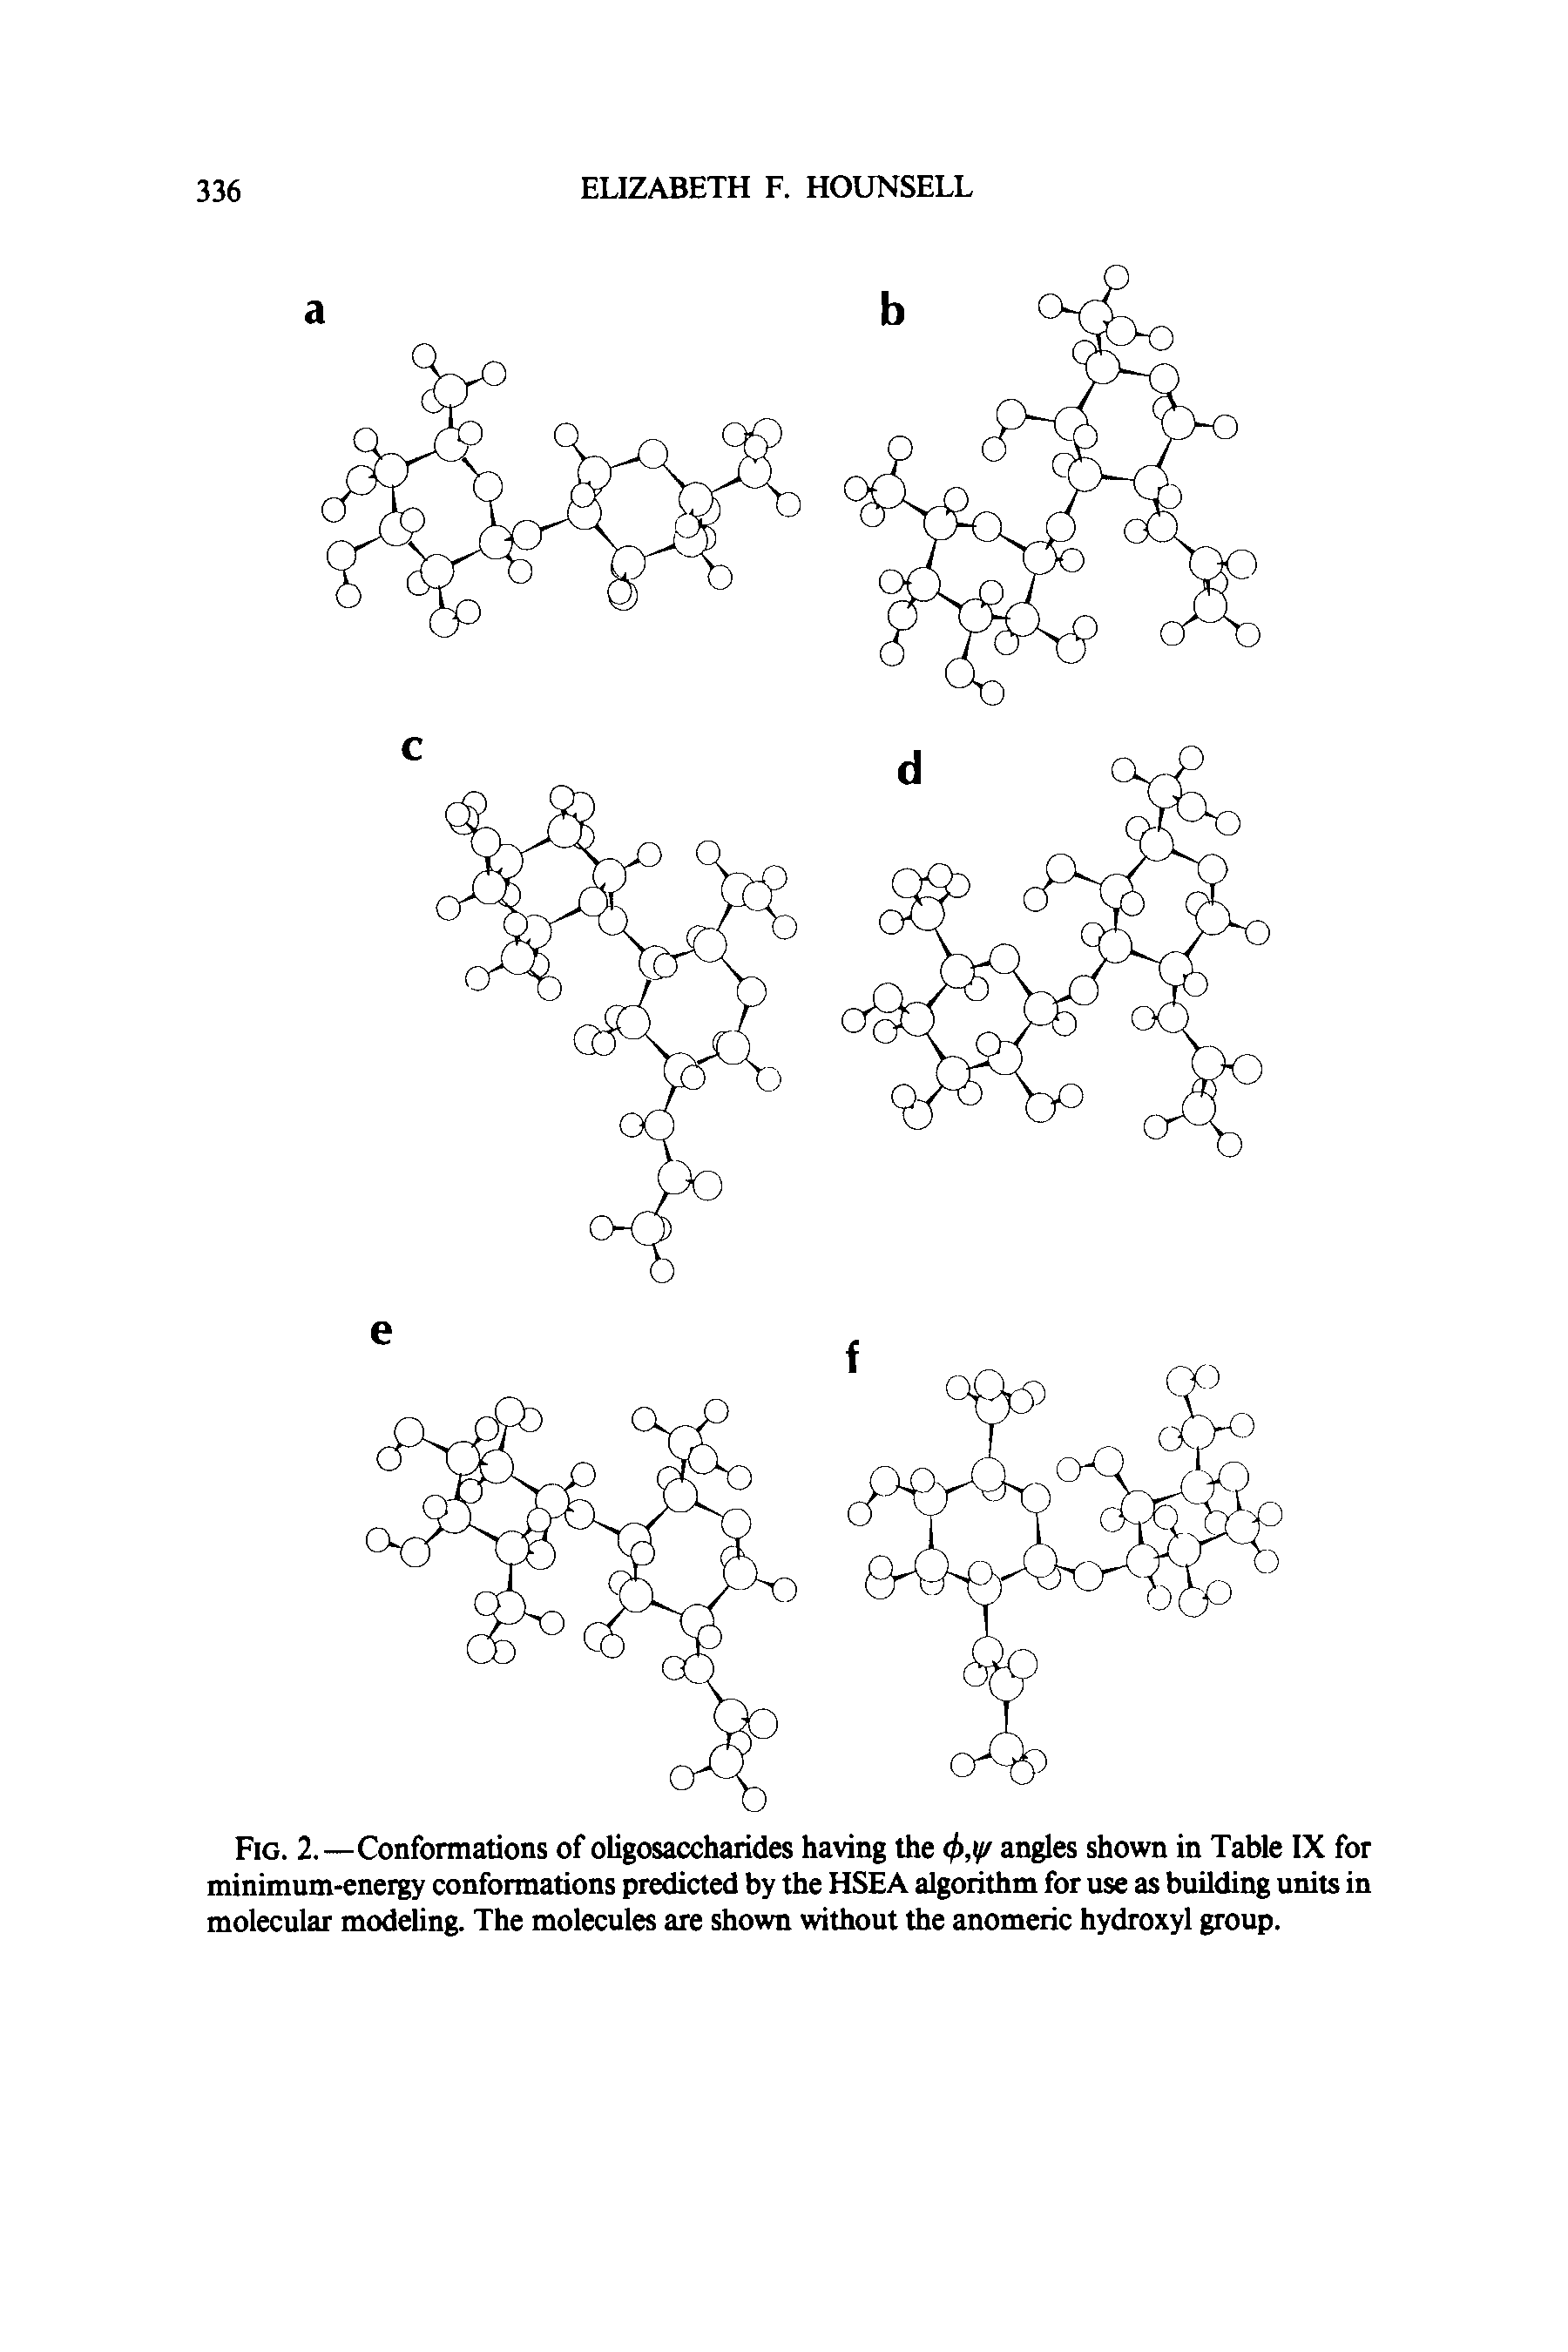 Fig. 2.—Conformations of oligosaccharides having the angles shown in Table IX for minimum-energy conformations predicted by the HSEA algorithm for use as building units in molecular modeling. The molecules are shown without the anomeric hydroxyl group.